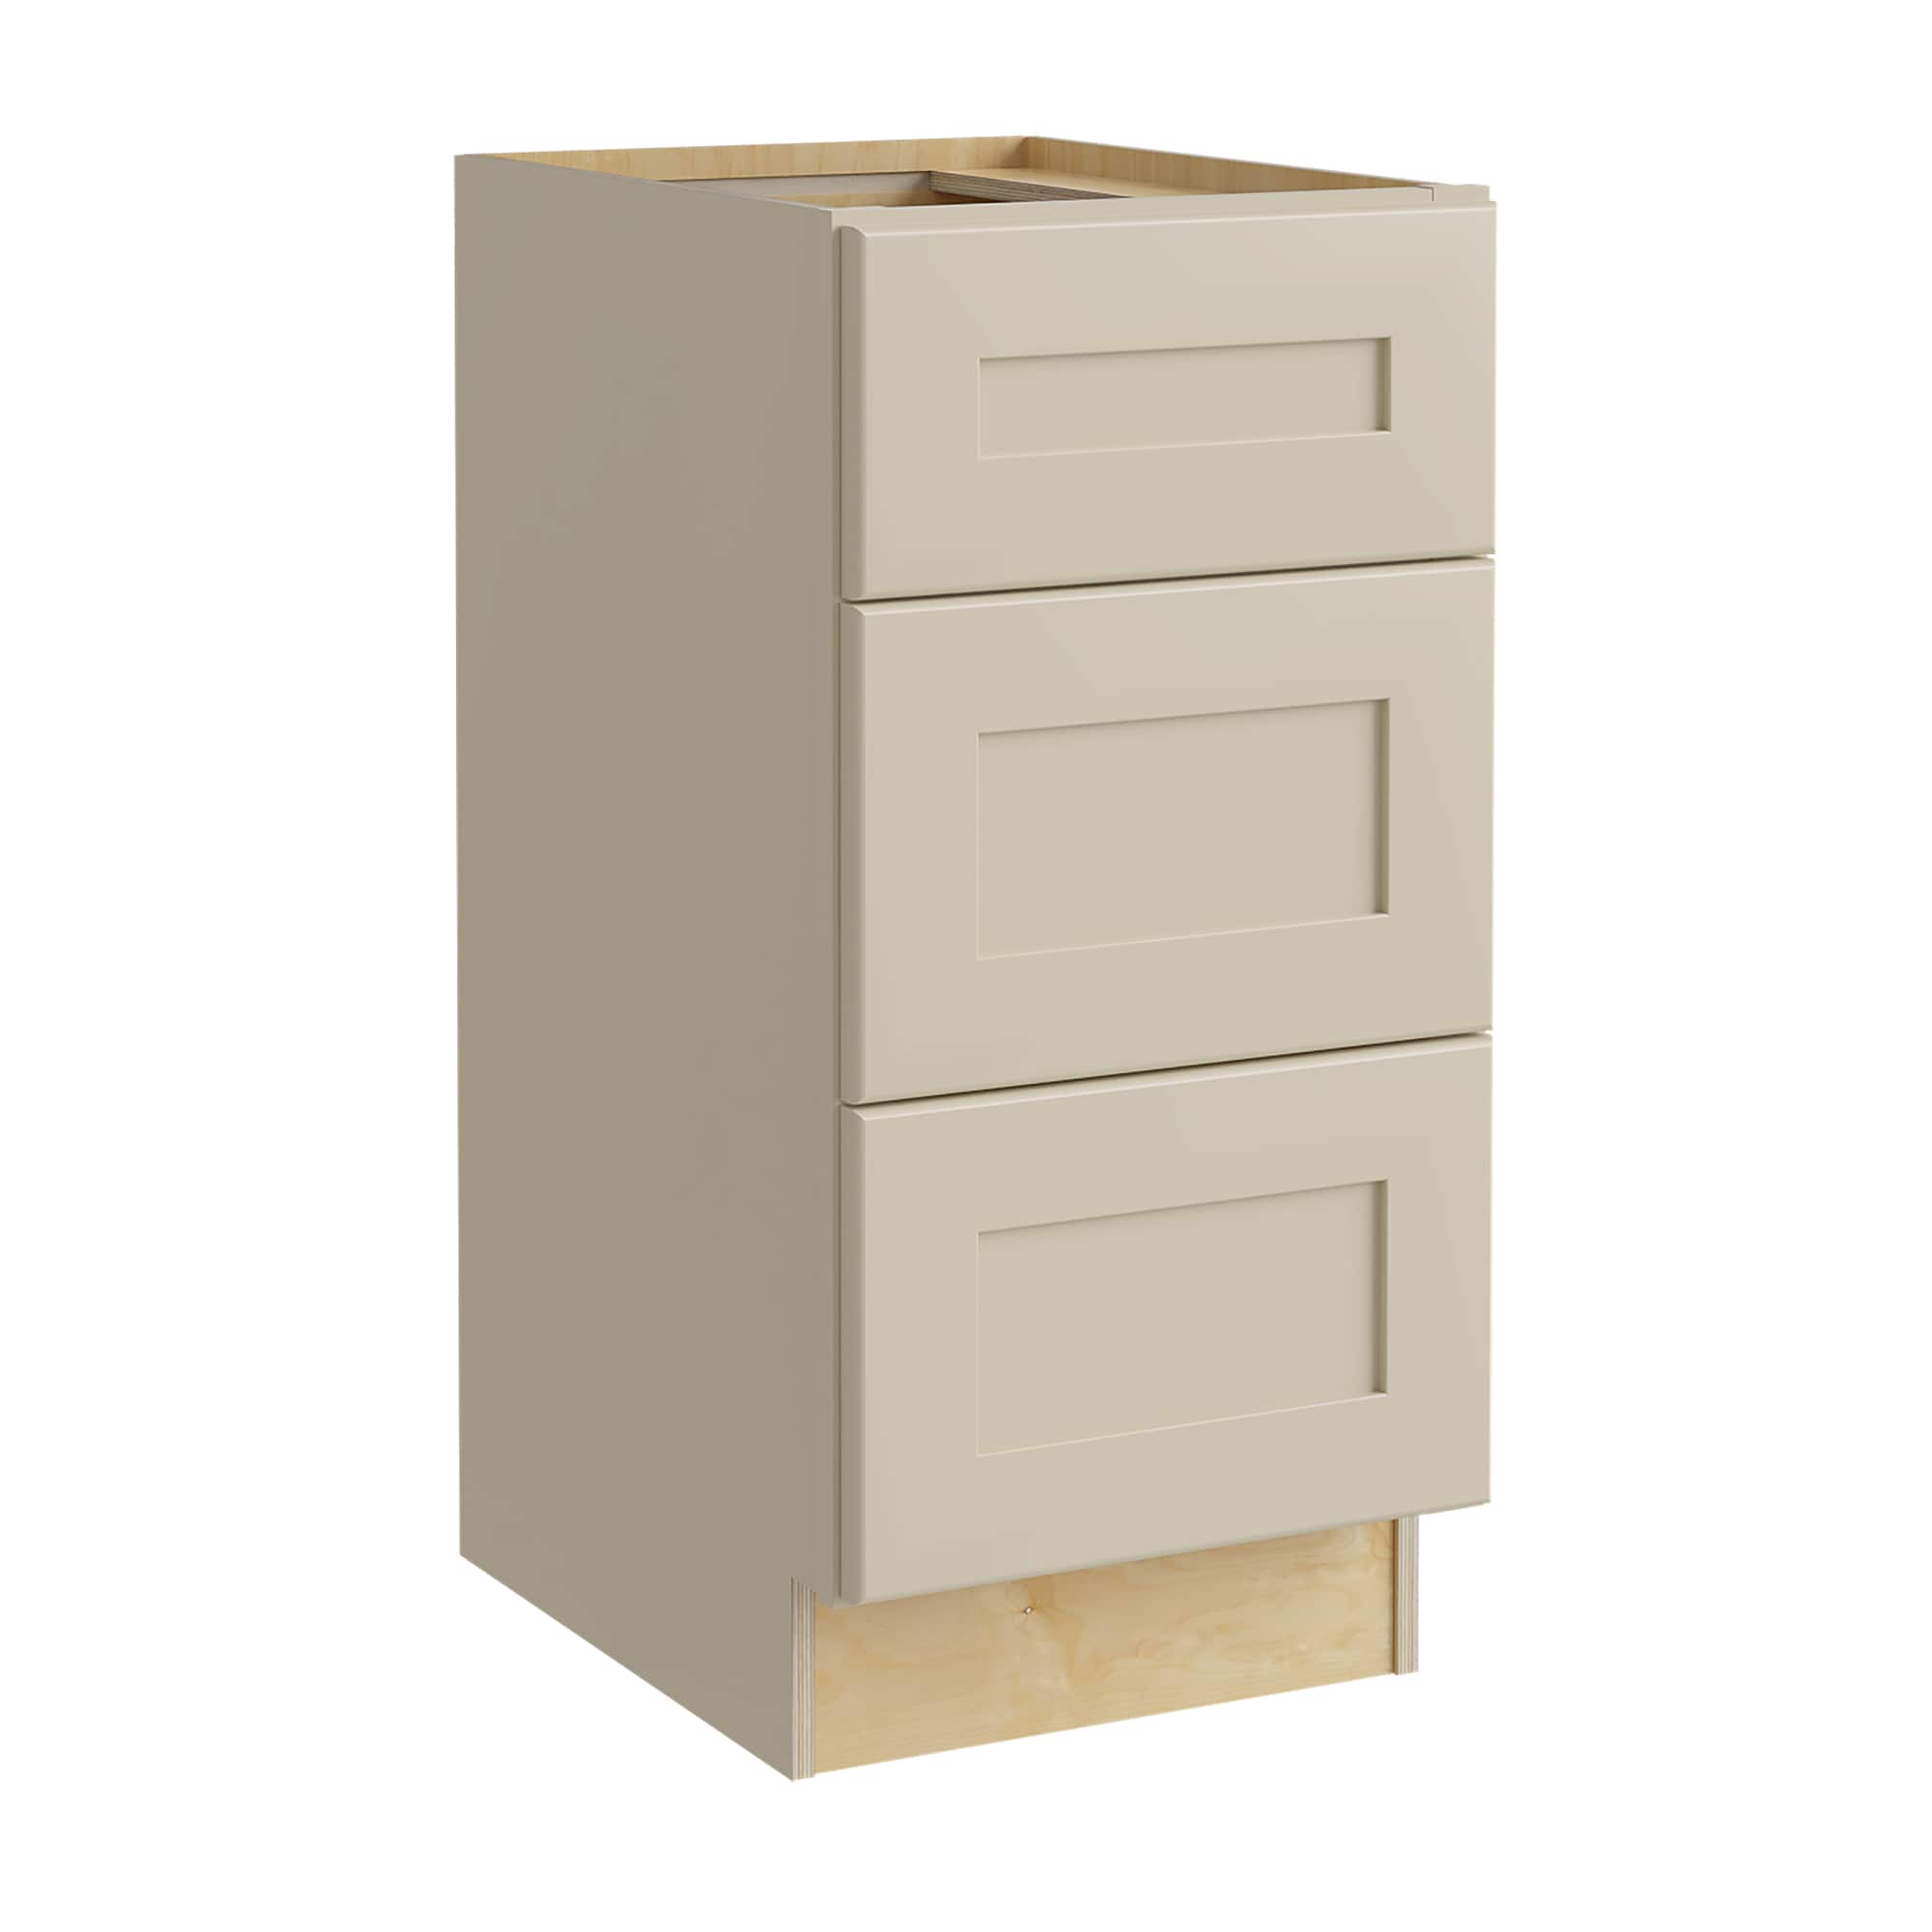 Luxxe Cabinetry 15-in W x 34.5-in H x 21-in D Norfolk Blended Cream Painted Drawer Base Fully Assembled Semi-custom Cabinet in Off-White | VBD1521-NBC